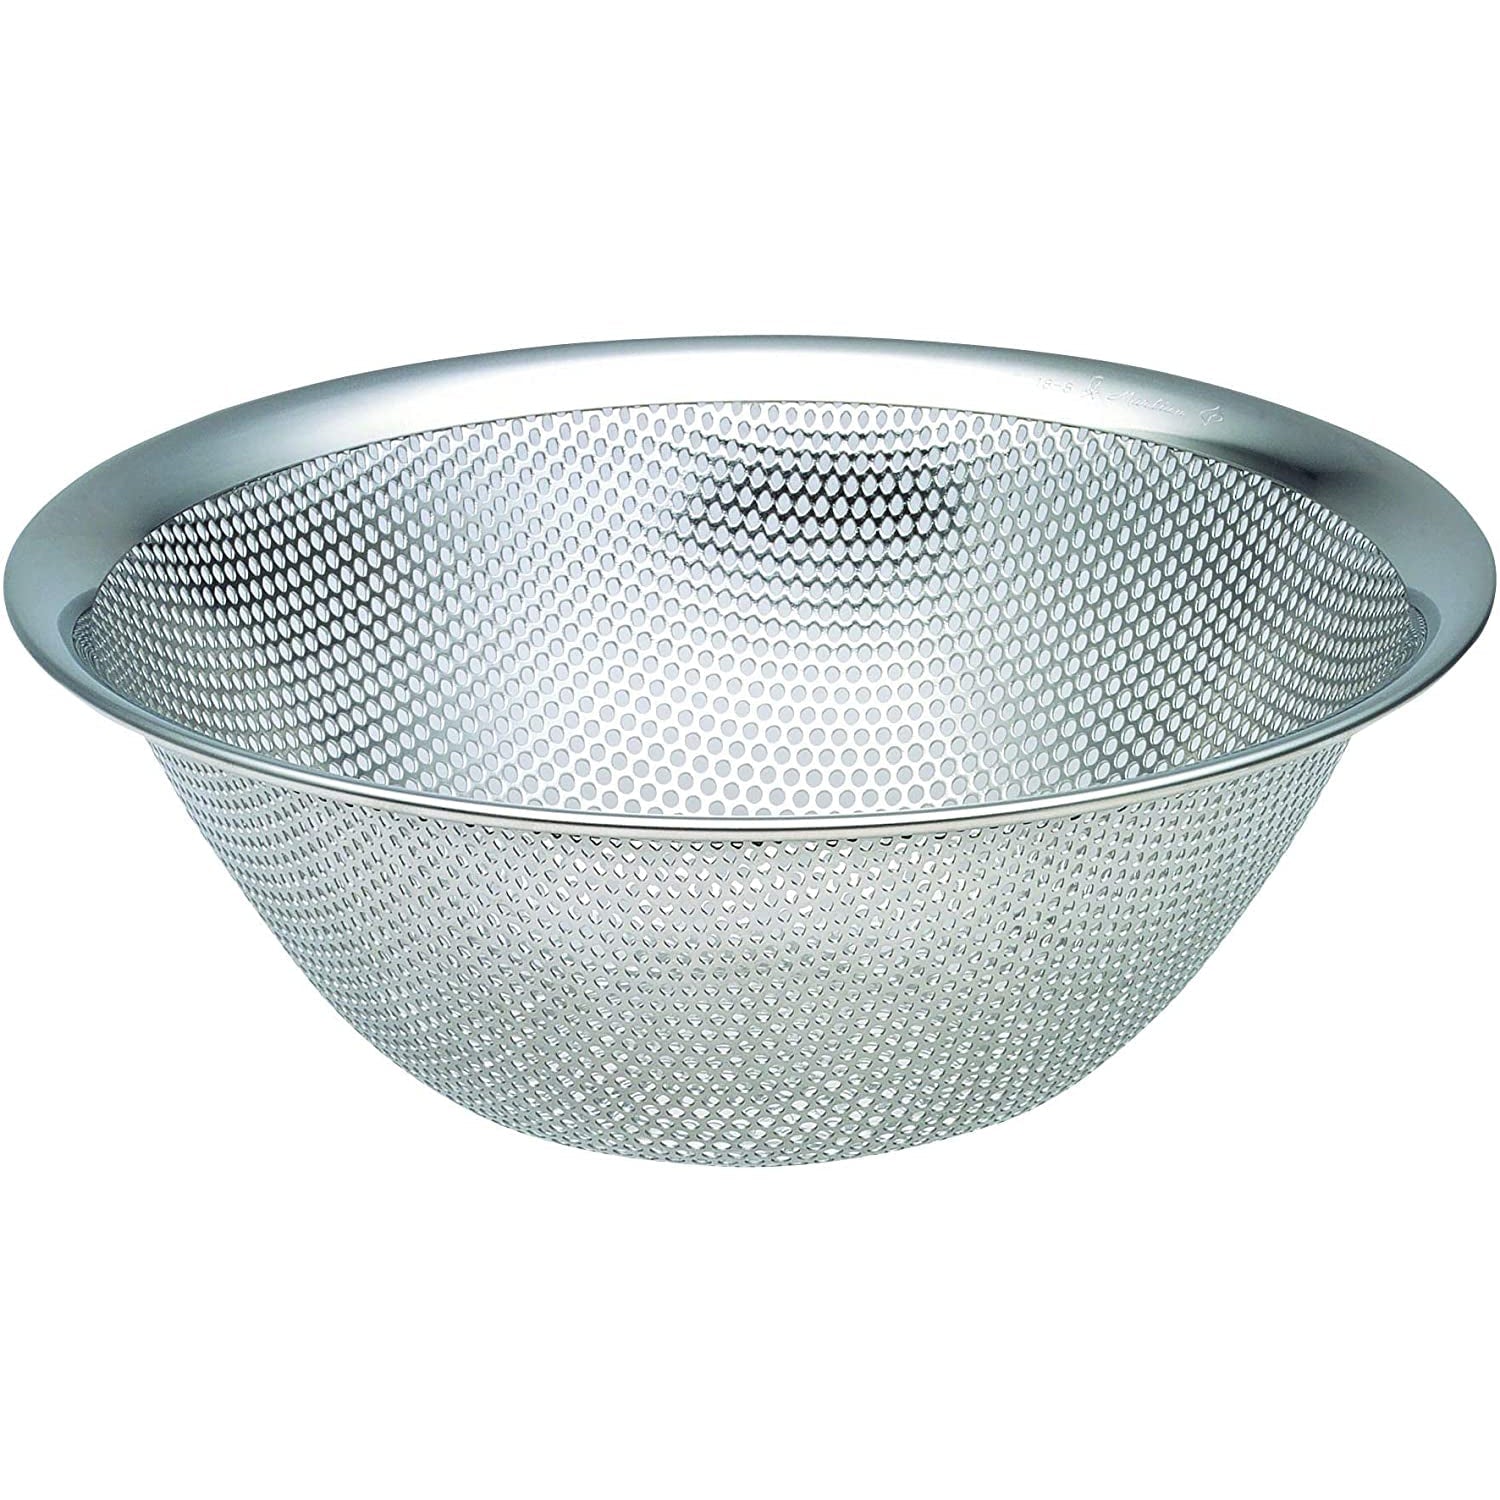 Japanese Stainless Steel Punched Strainer with Handle 18cm 